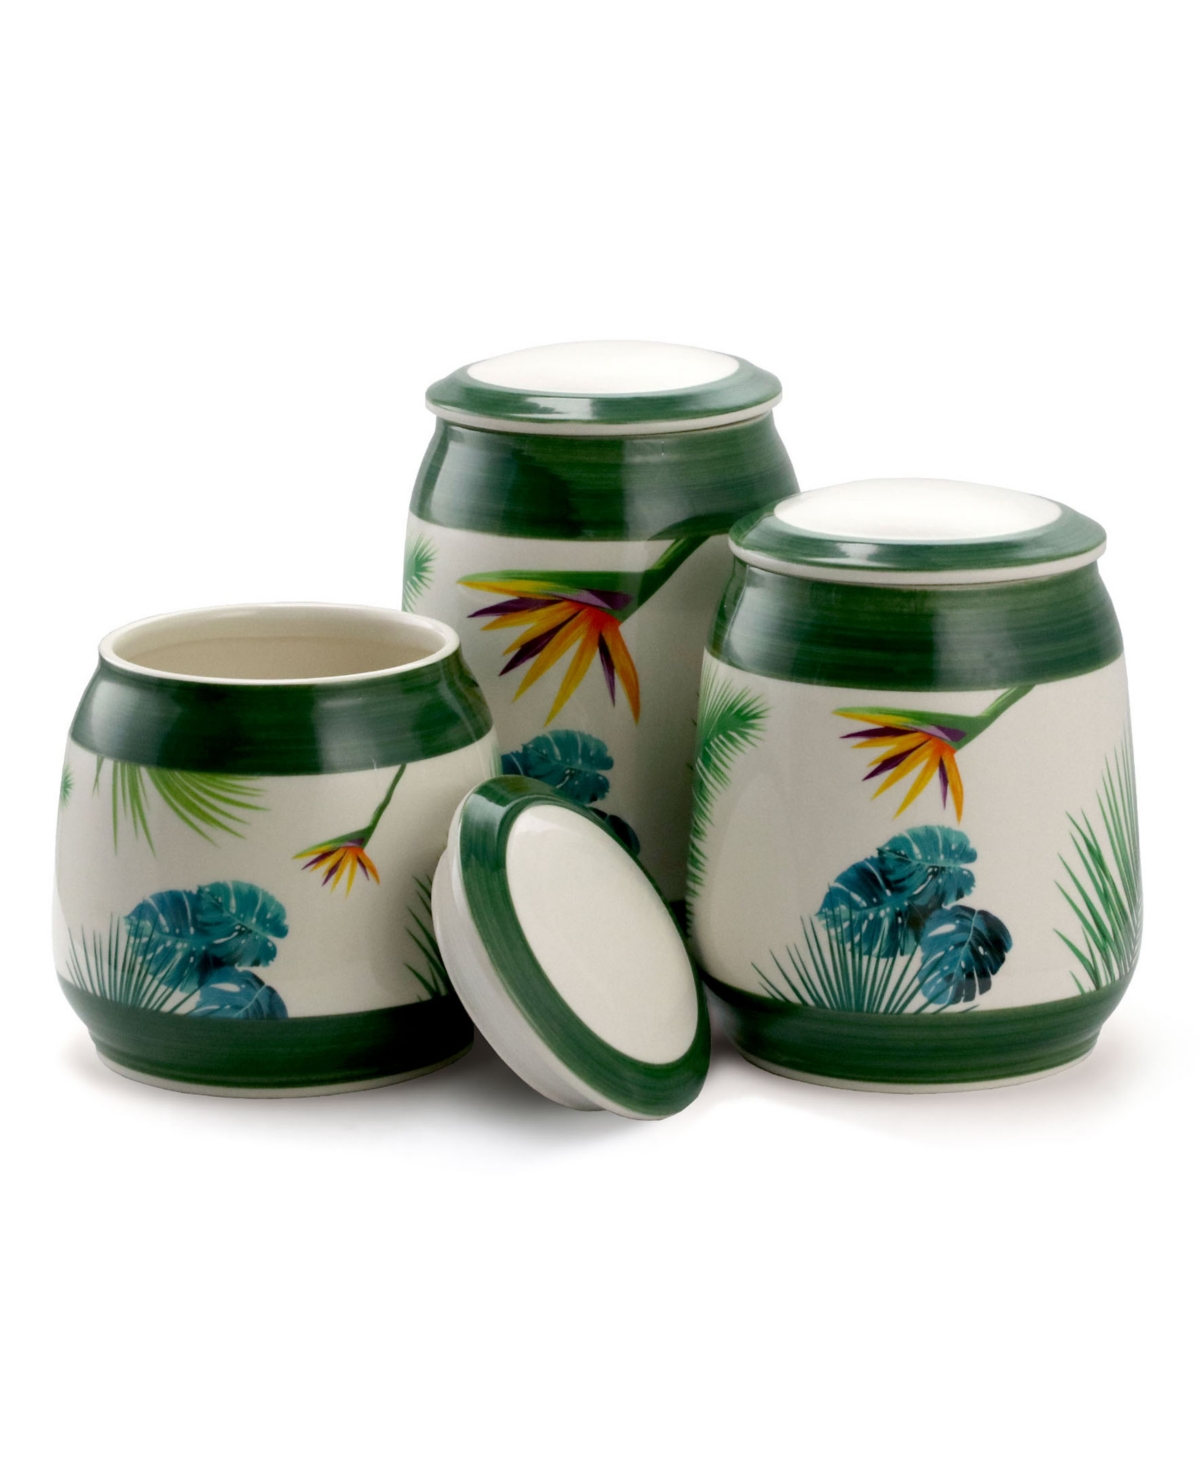 Elama Ceramic Kitchen Canister Collection - 3 Piece